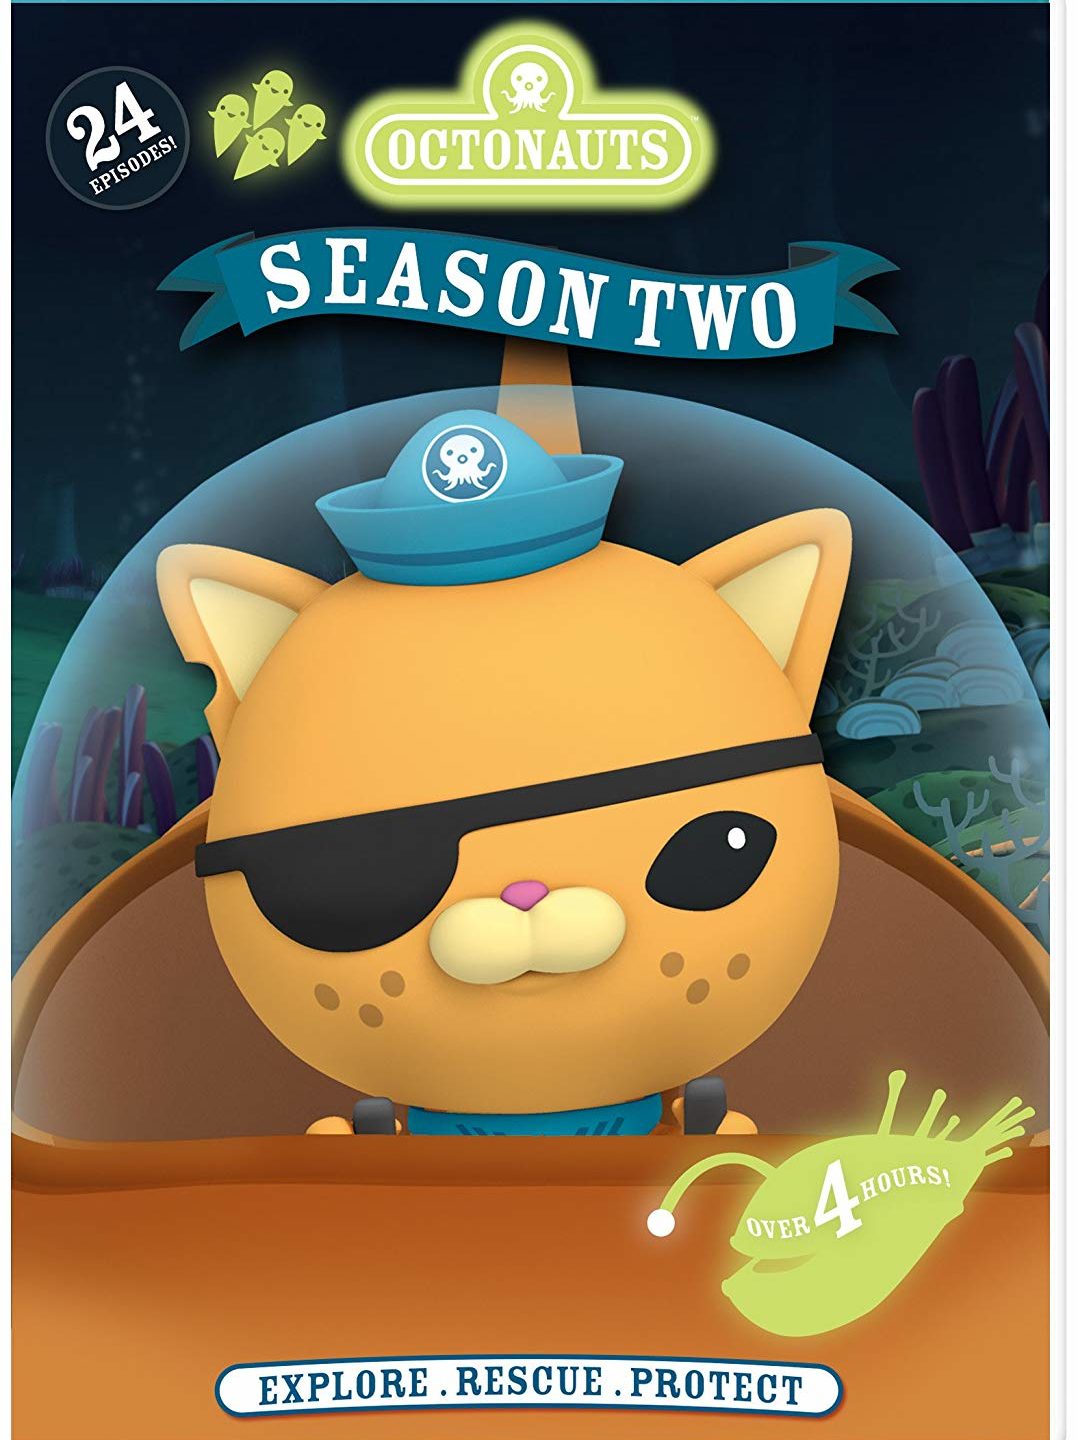 Octonauts, Season Two: Whether You Love The Ocean Or Not, This Is Filled With Information In A Fun Way!